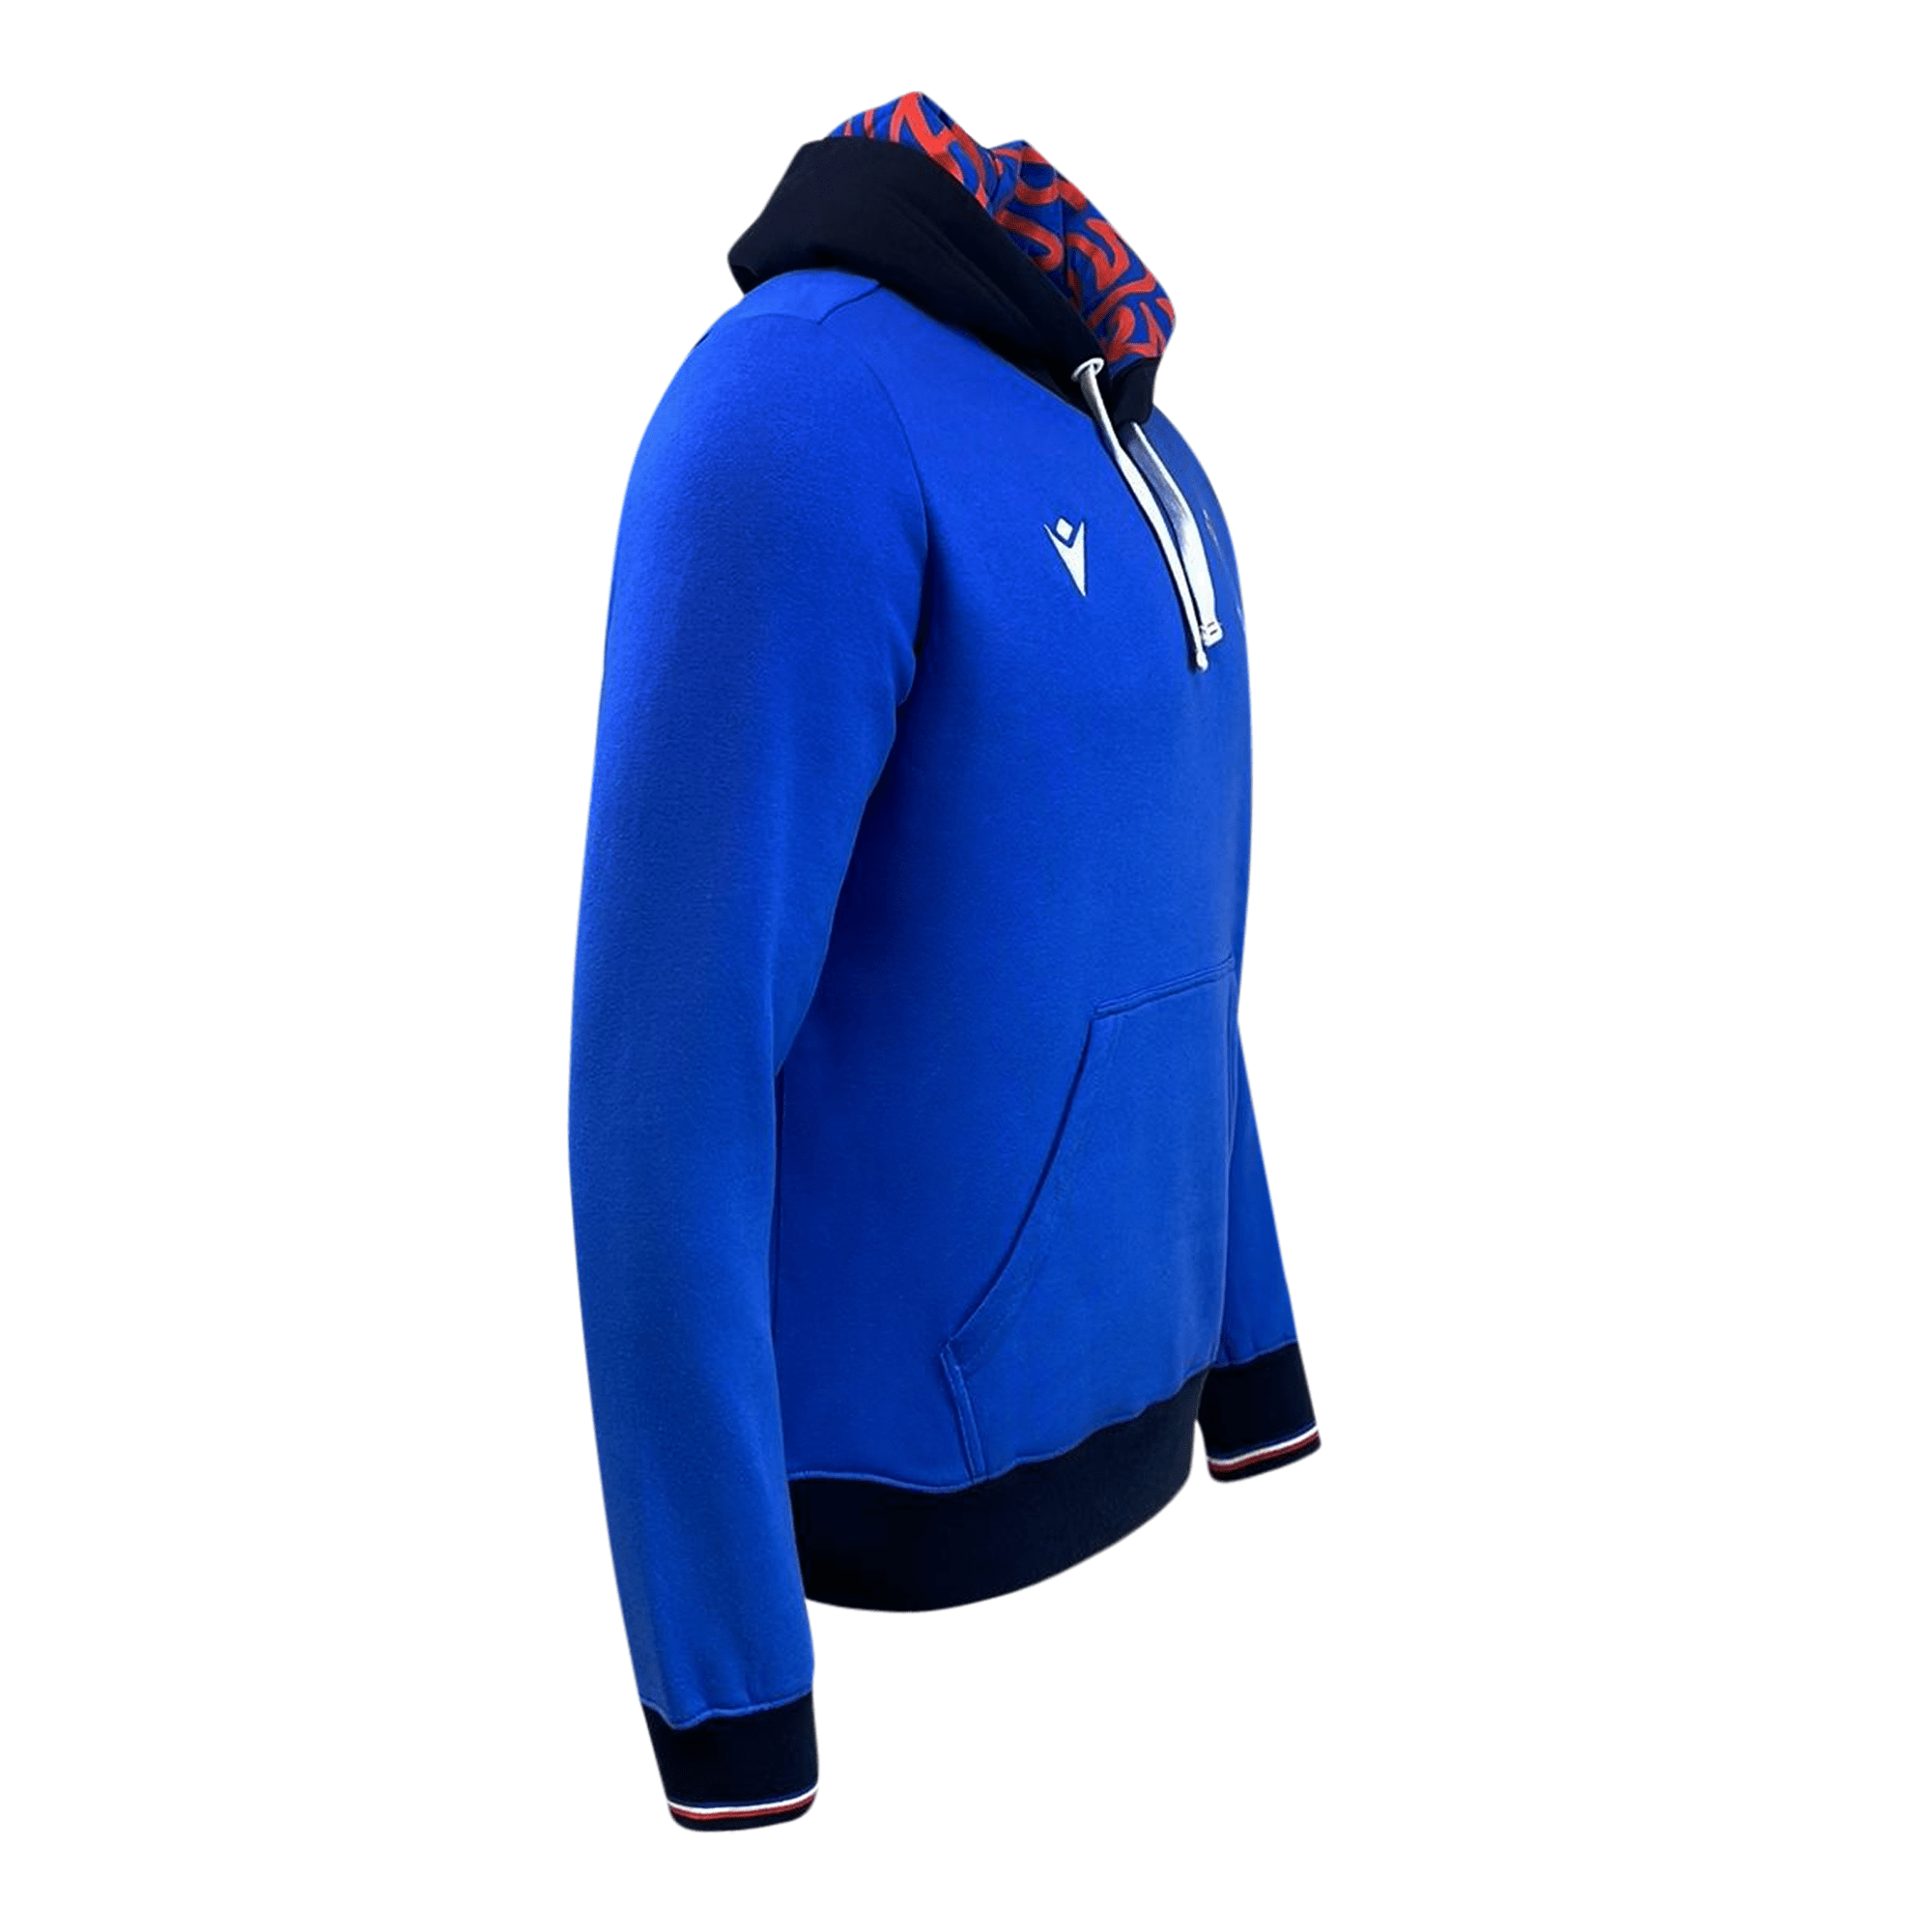 Rugby World Cup 23 Brushed Fleece Hoodie by Macron